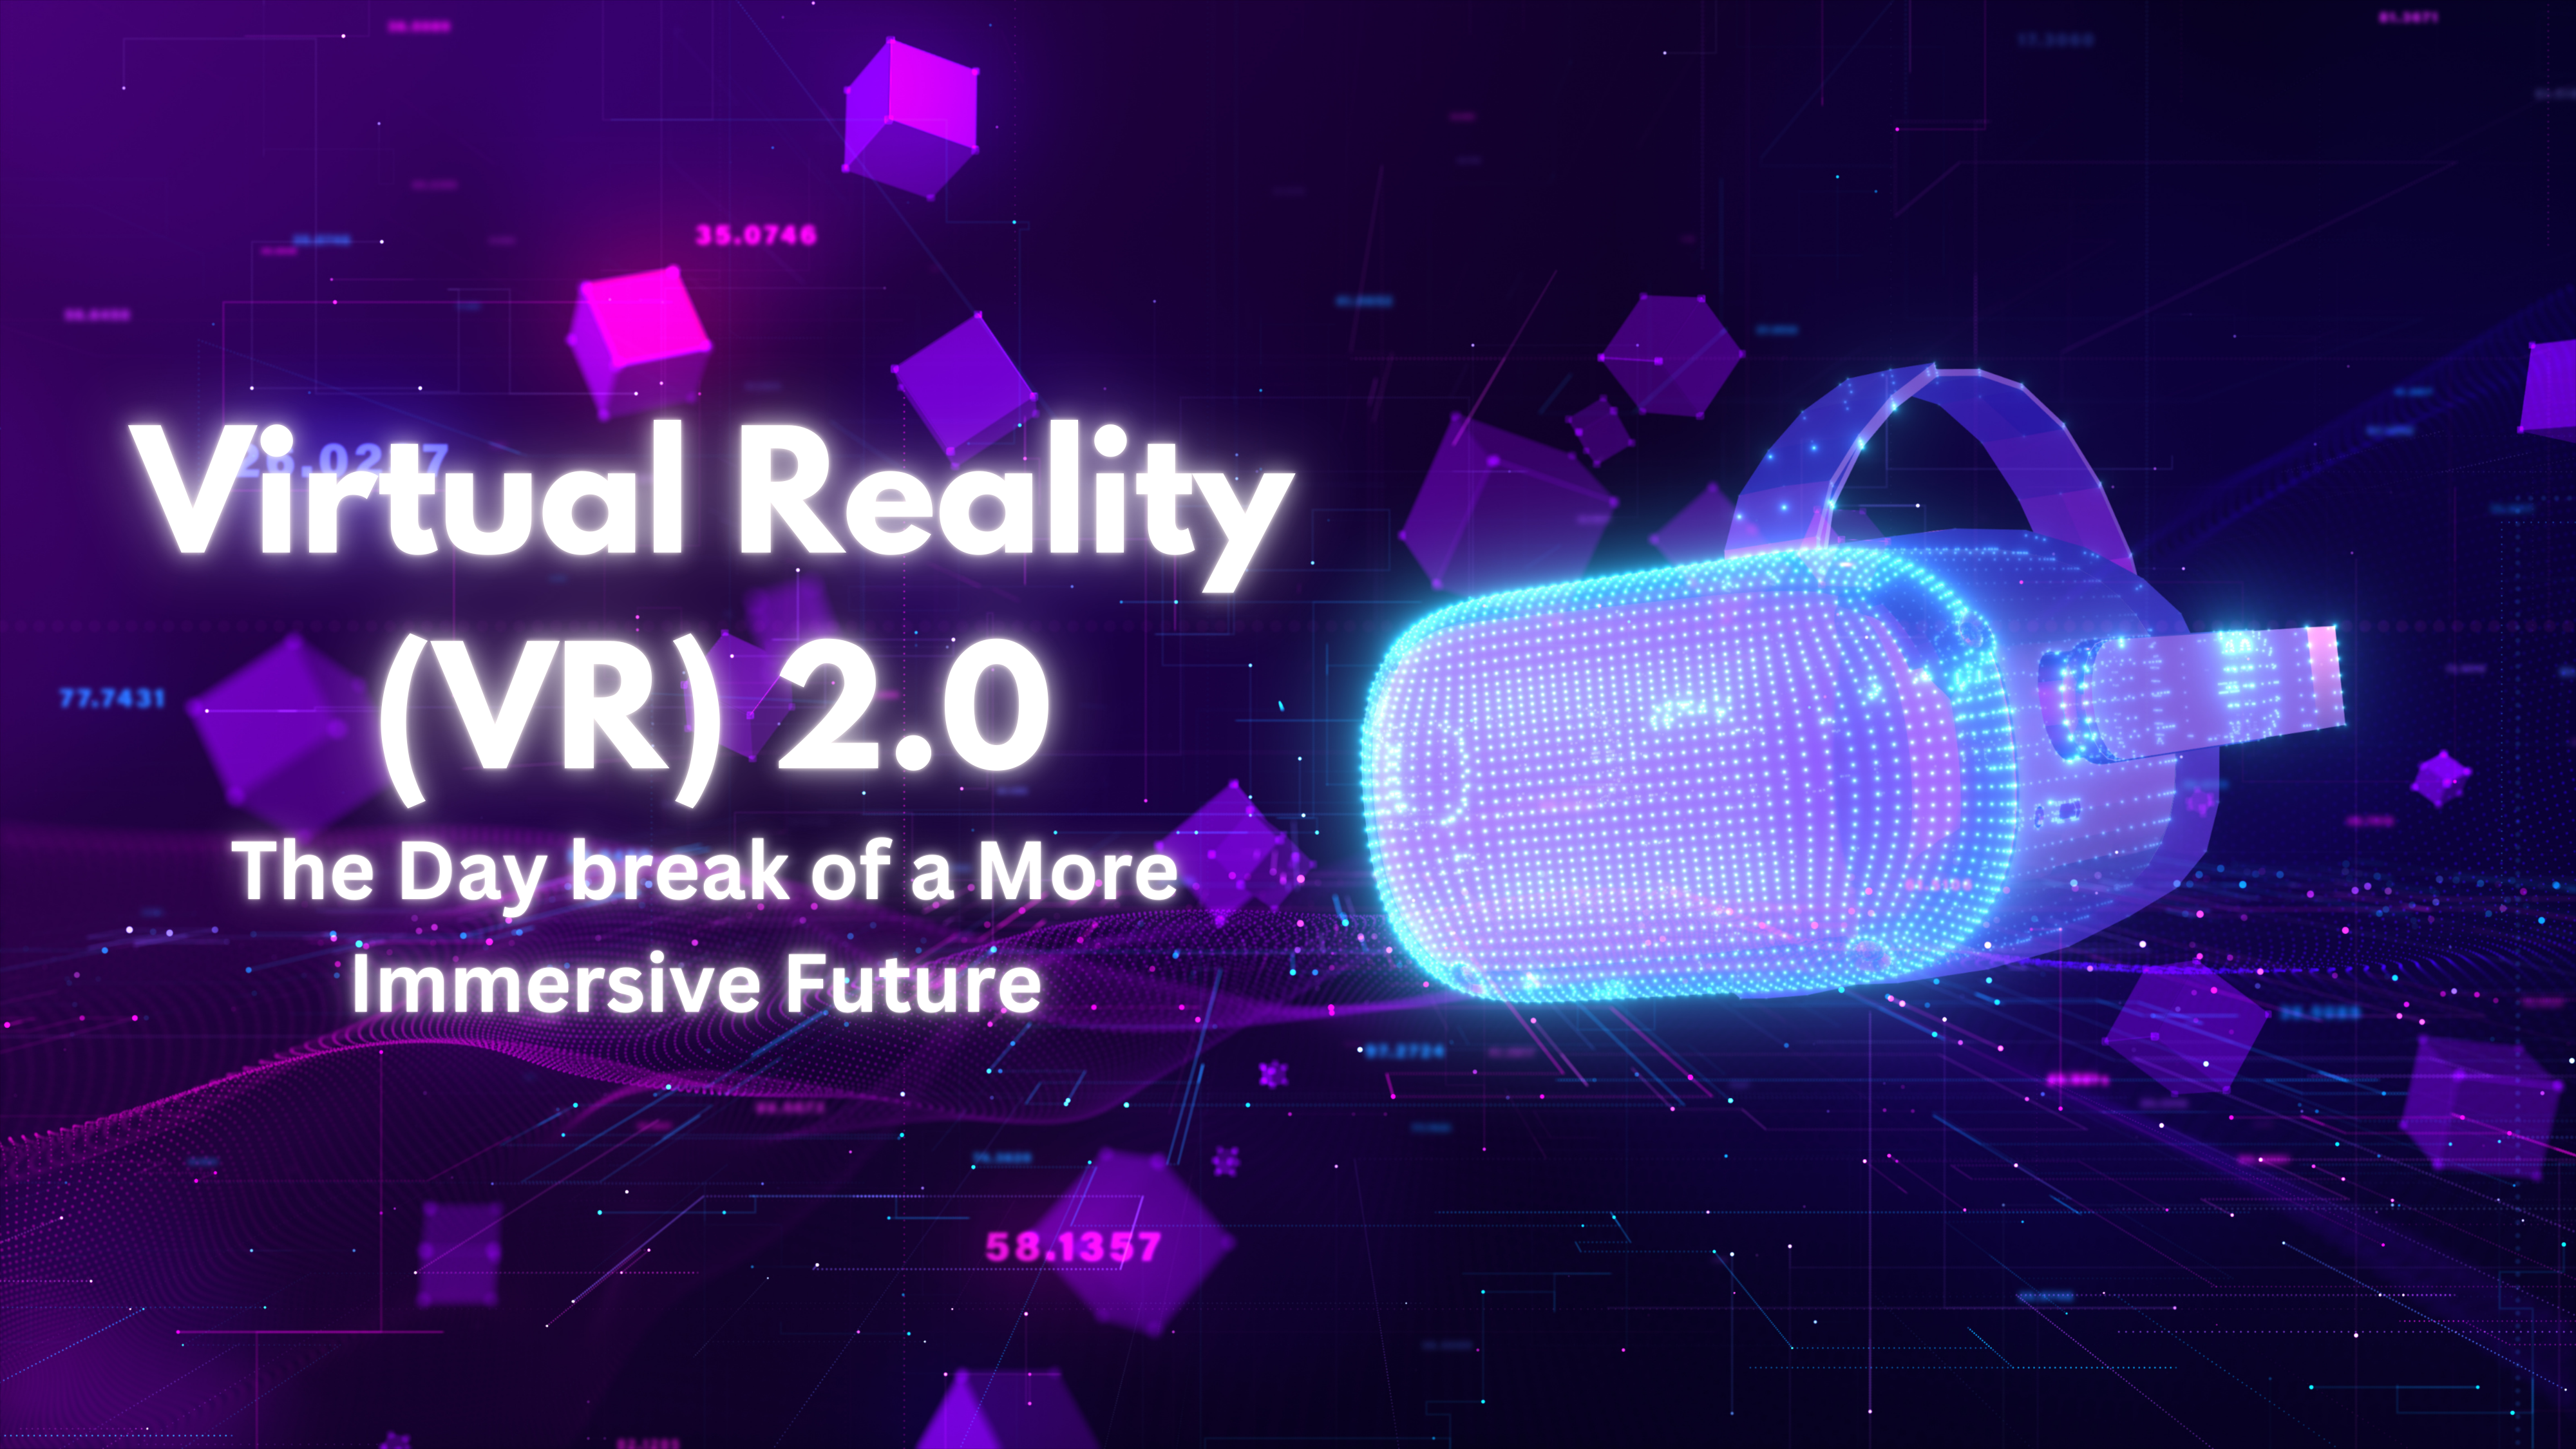 Virtual Reality (VR) 2.0: The Day break of a More Immersive Future